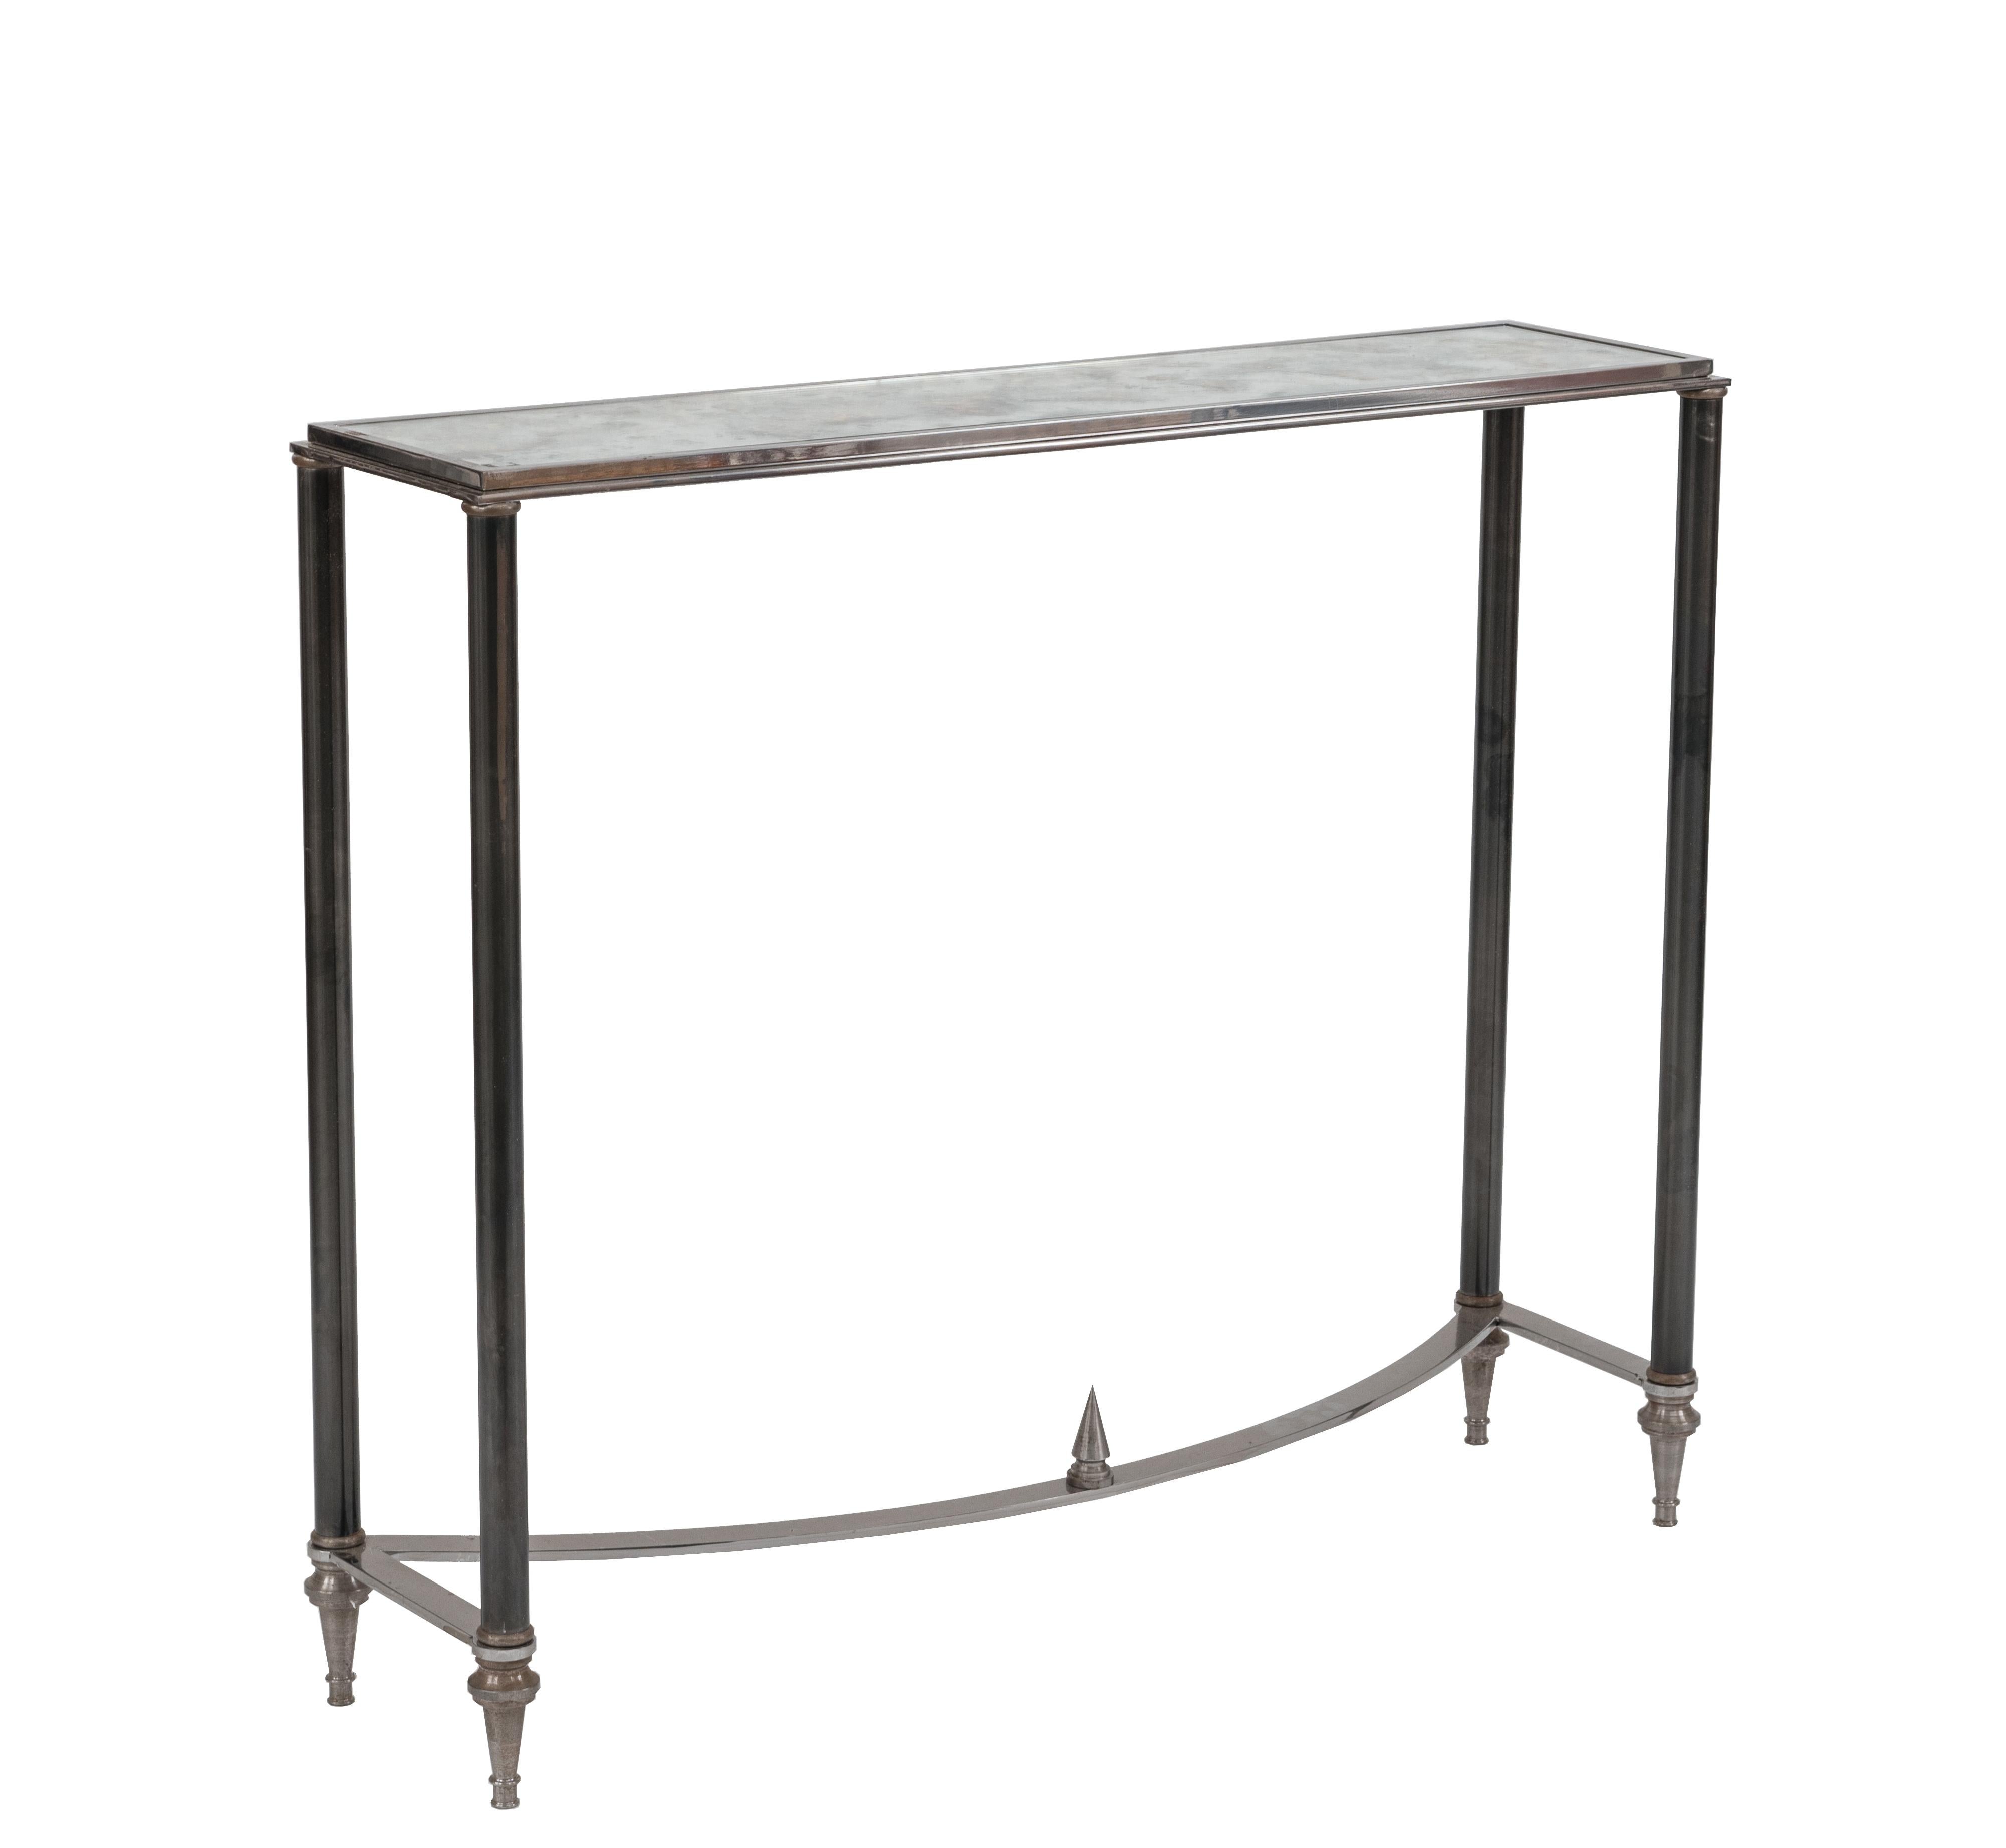 Pair of French (1960s-1970s) post-war design console tables in gun metal and brass trim with a semi-circular stretcher & verre églomisé glass top. (stamped: MAISON JANSEN).


Maison Jansen was a Paris-based interior decoration office founded in